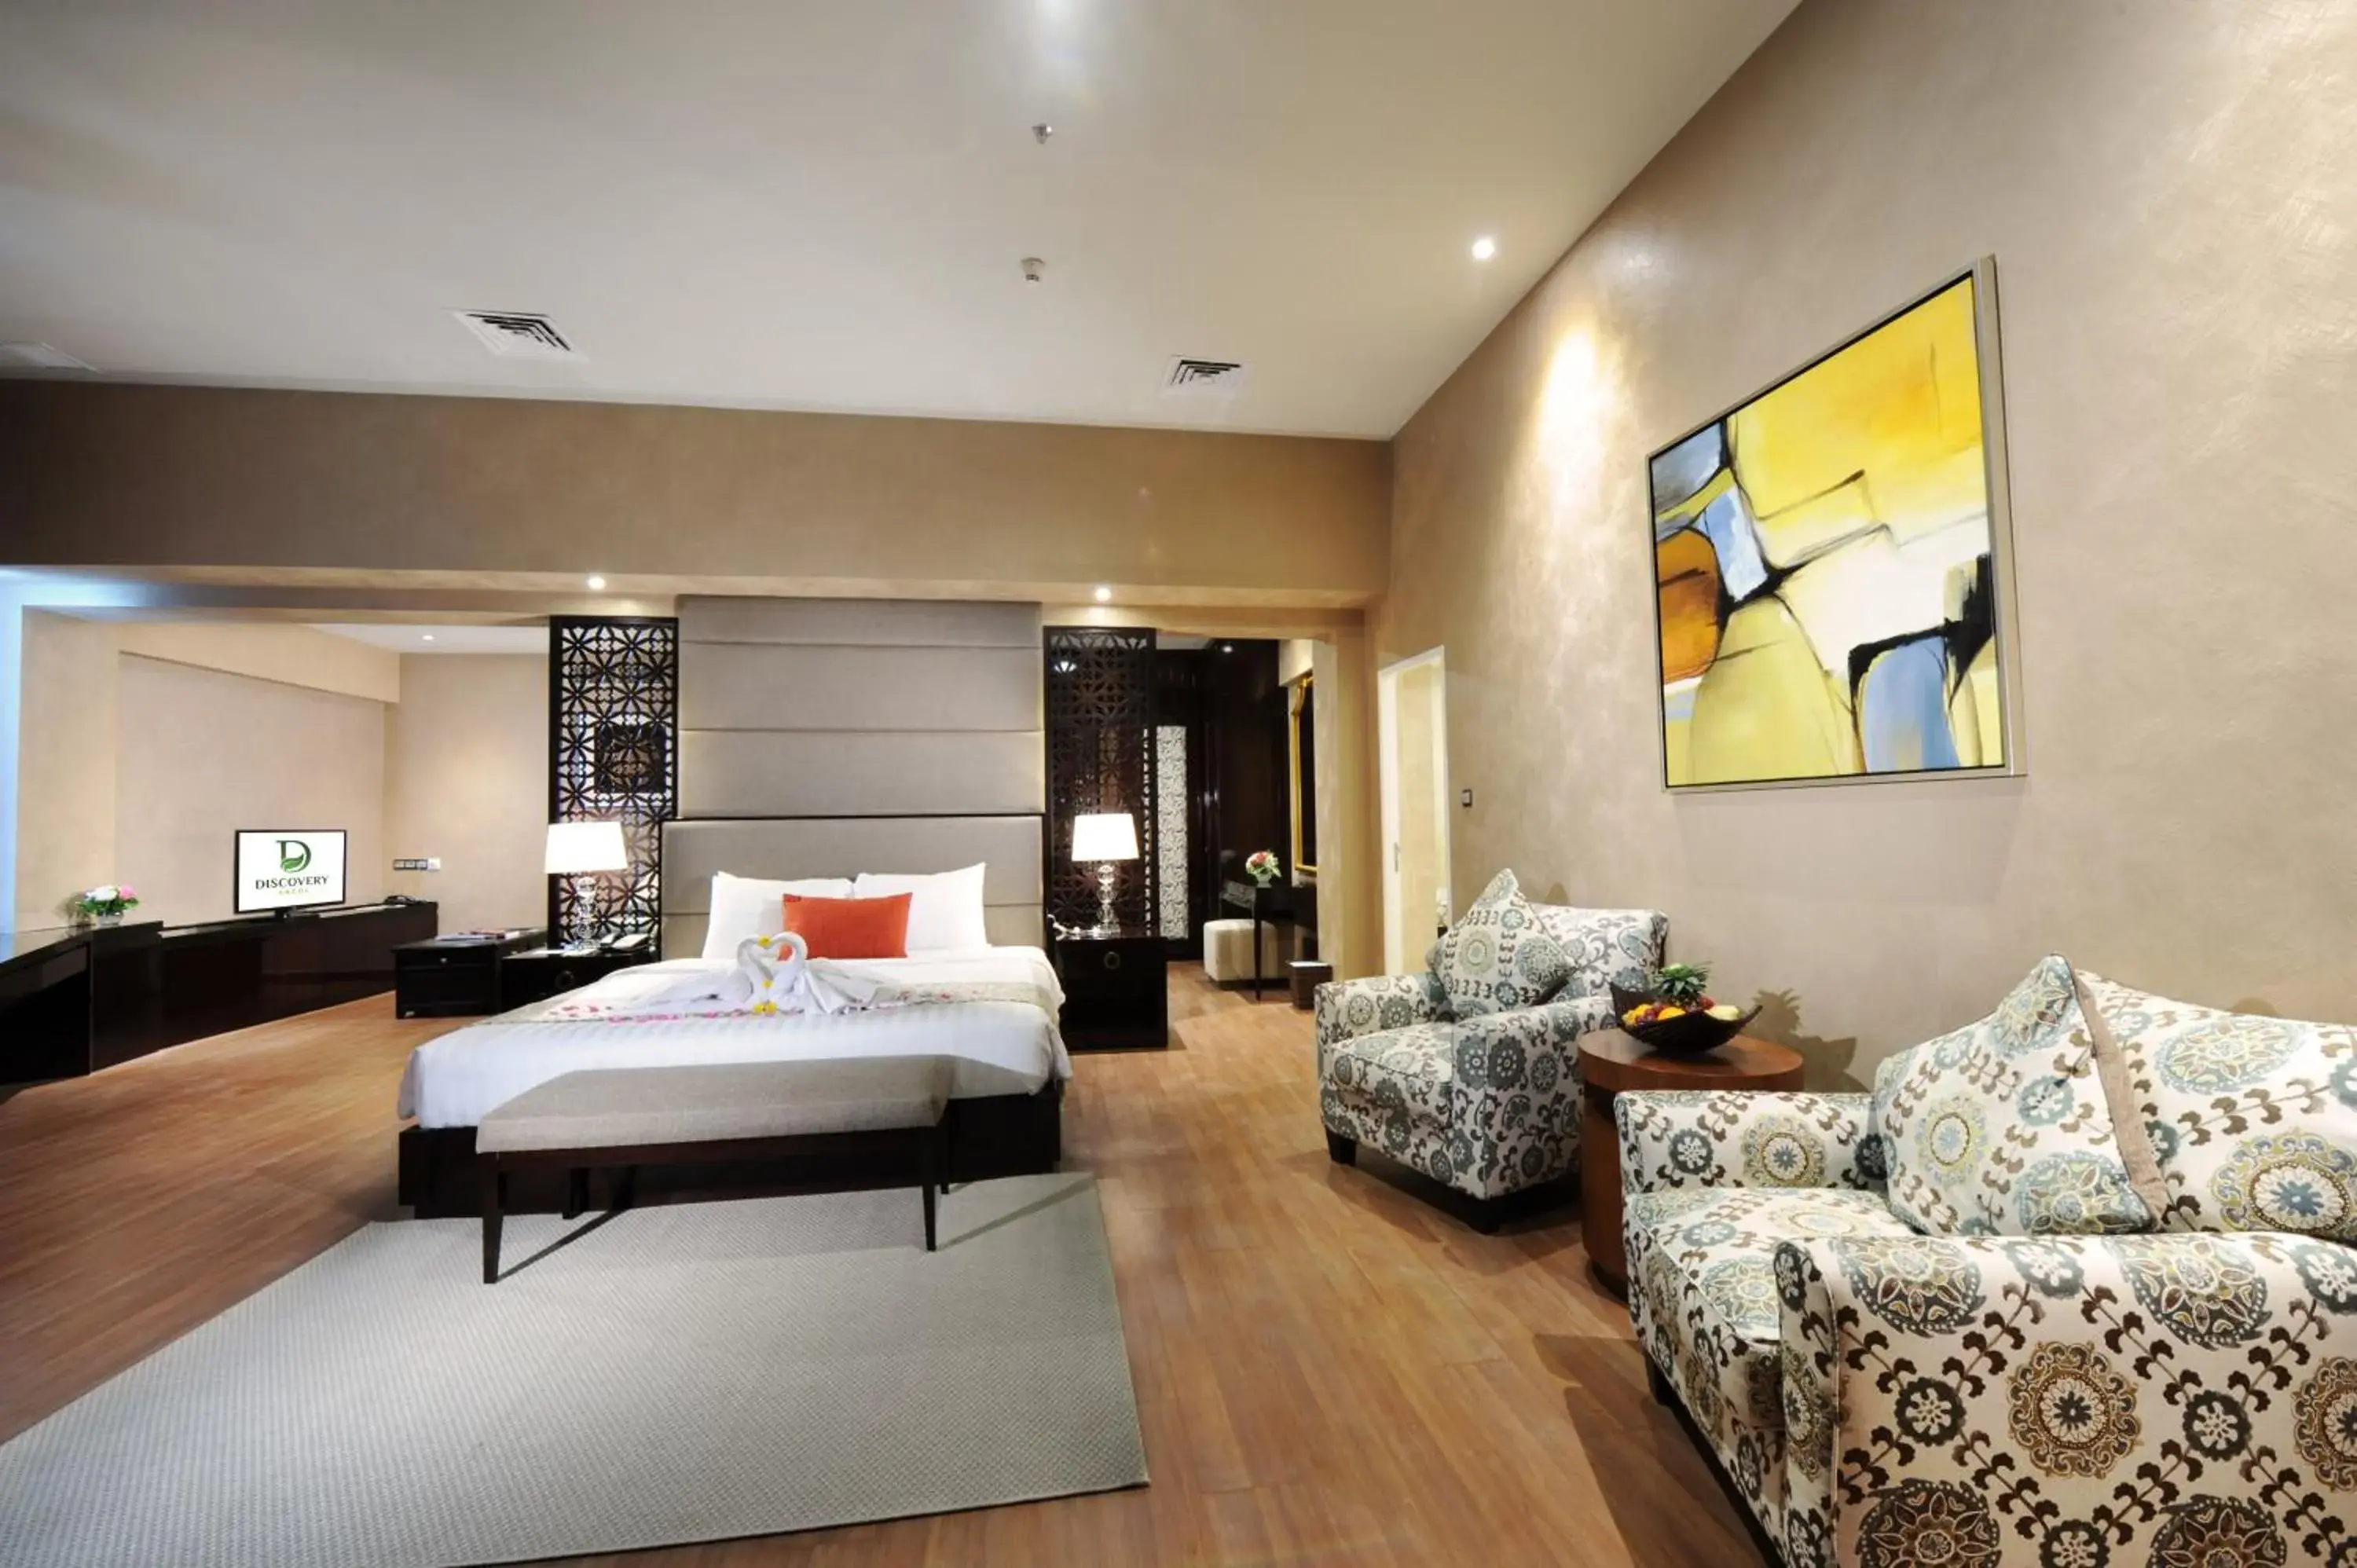 Bedroom in Discovery Ancol